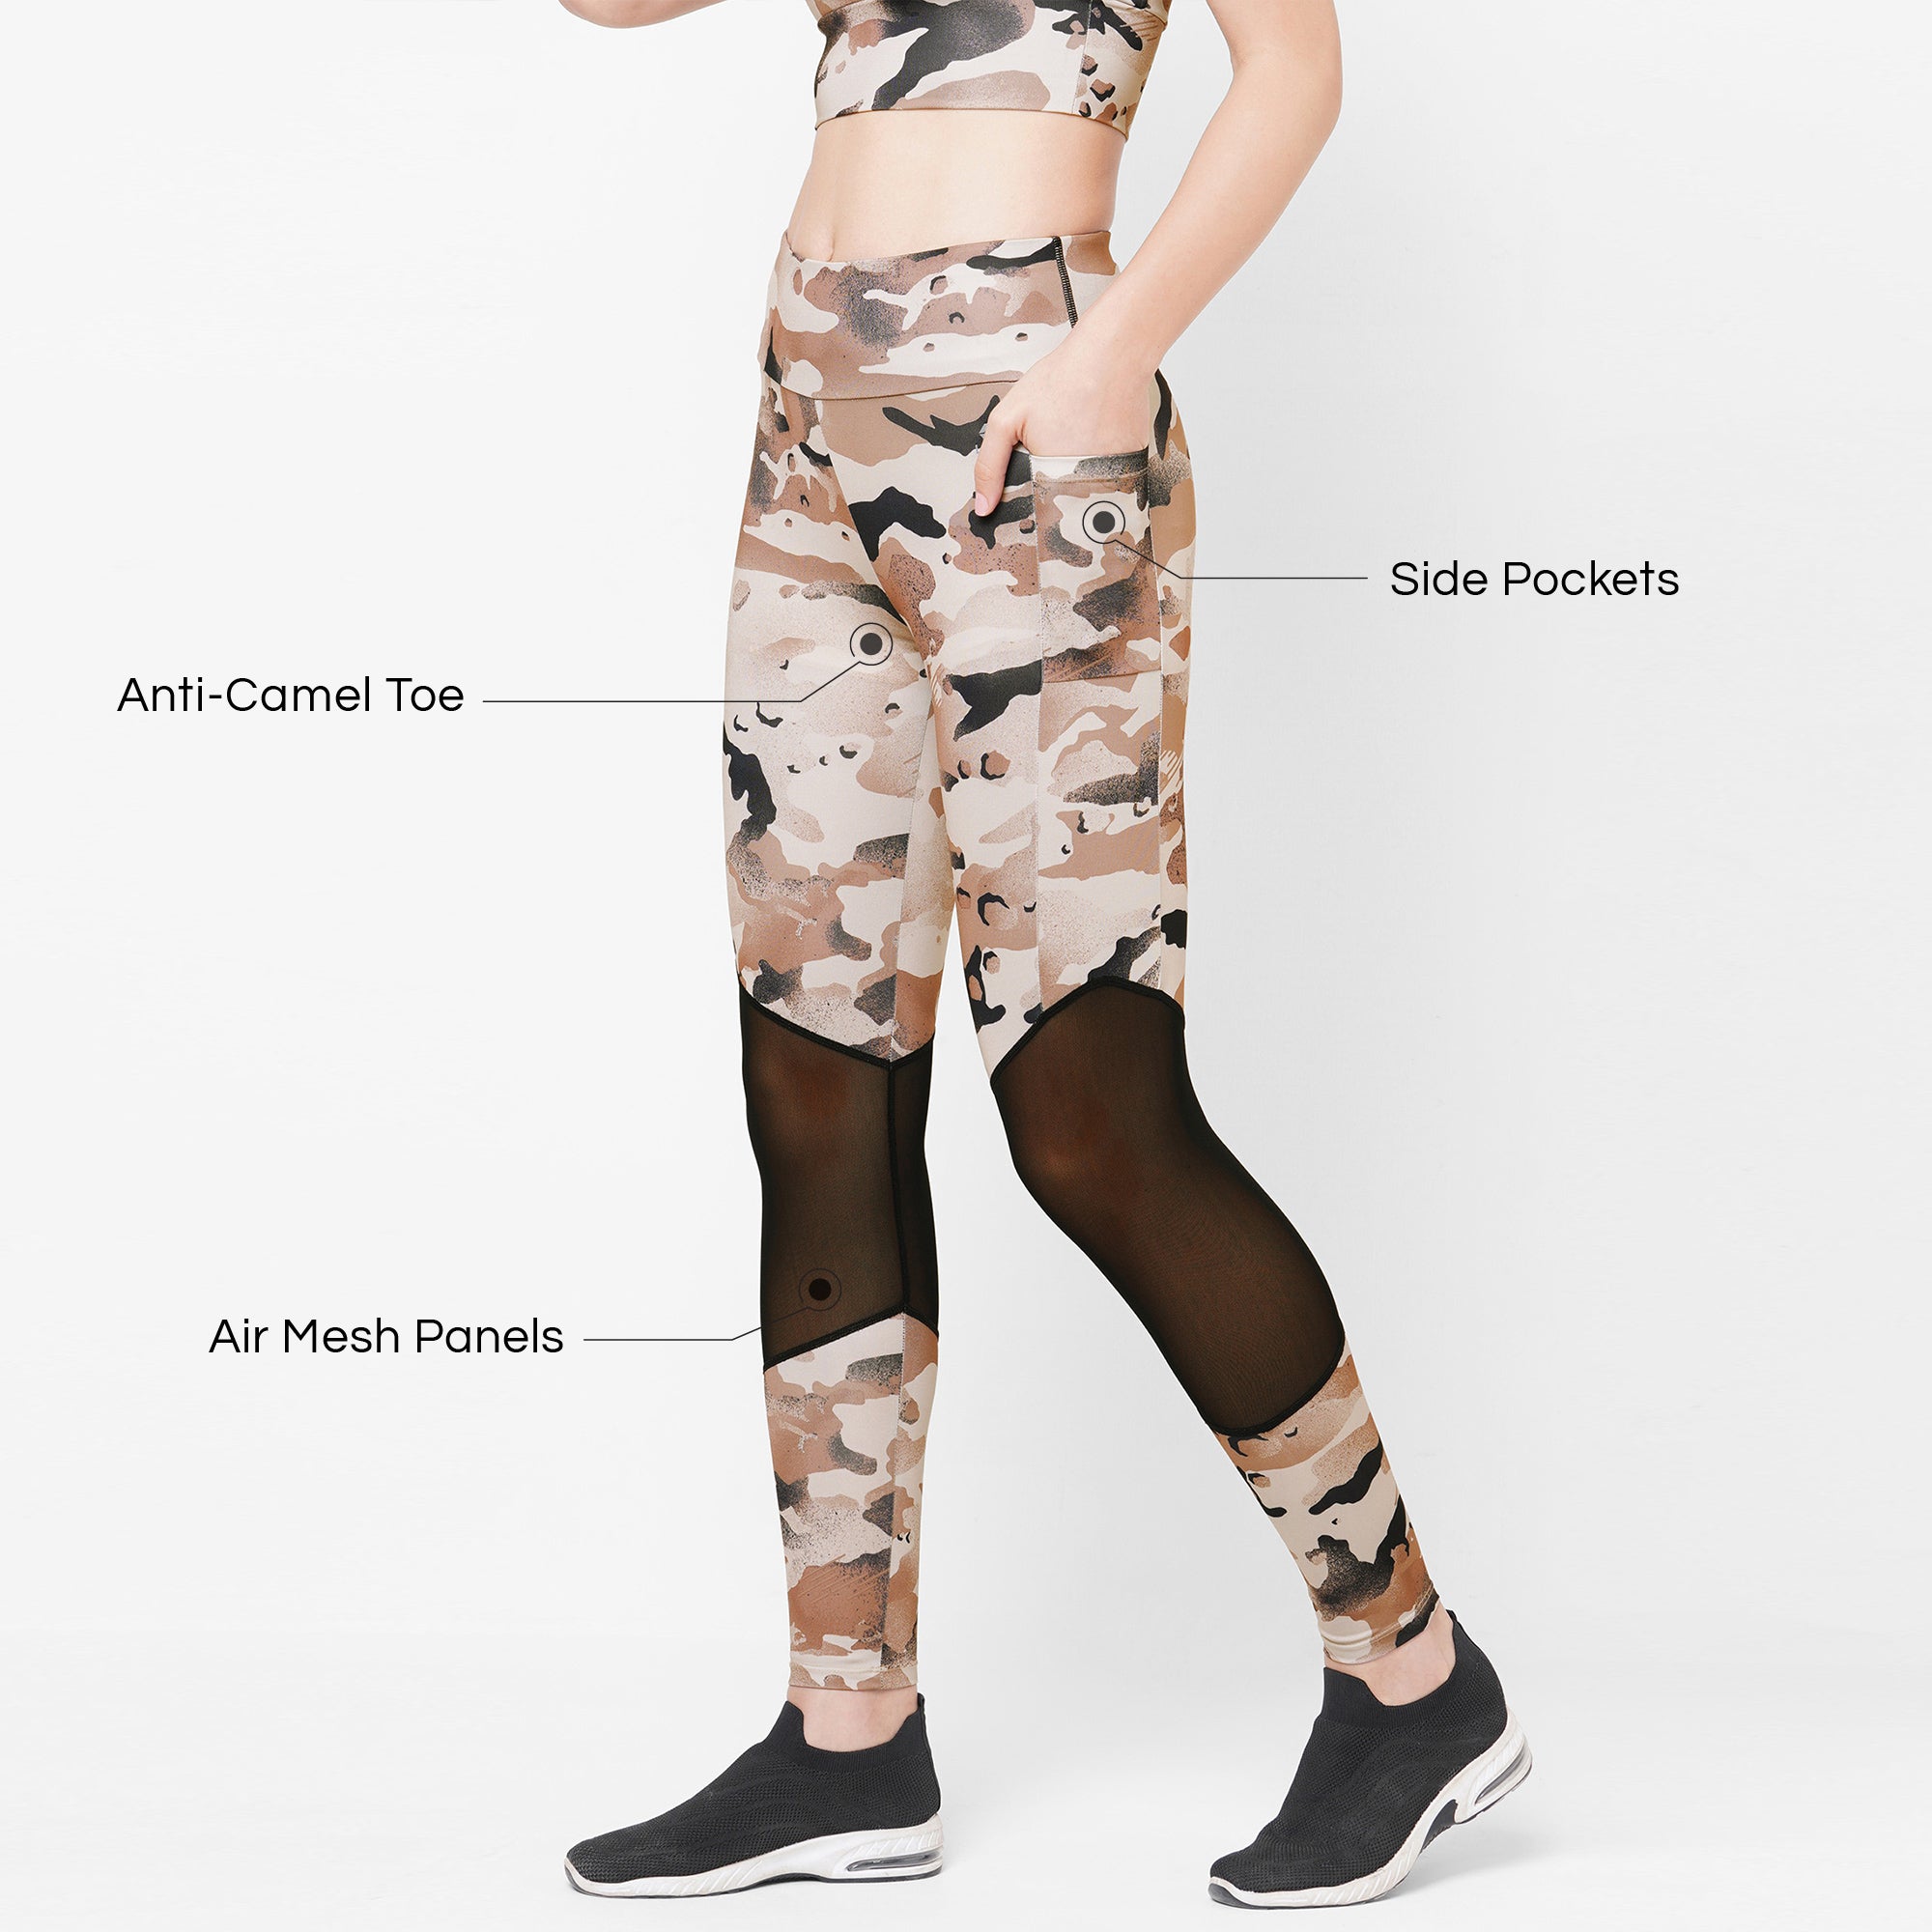 Briar V Back Leggings With Pockets - Dark Chocolate | Active wear tops,  Athletic looks, Activewear fashion